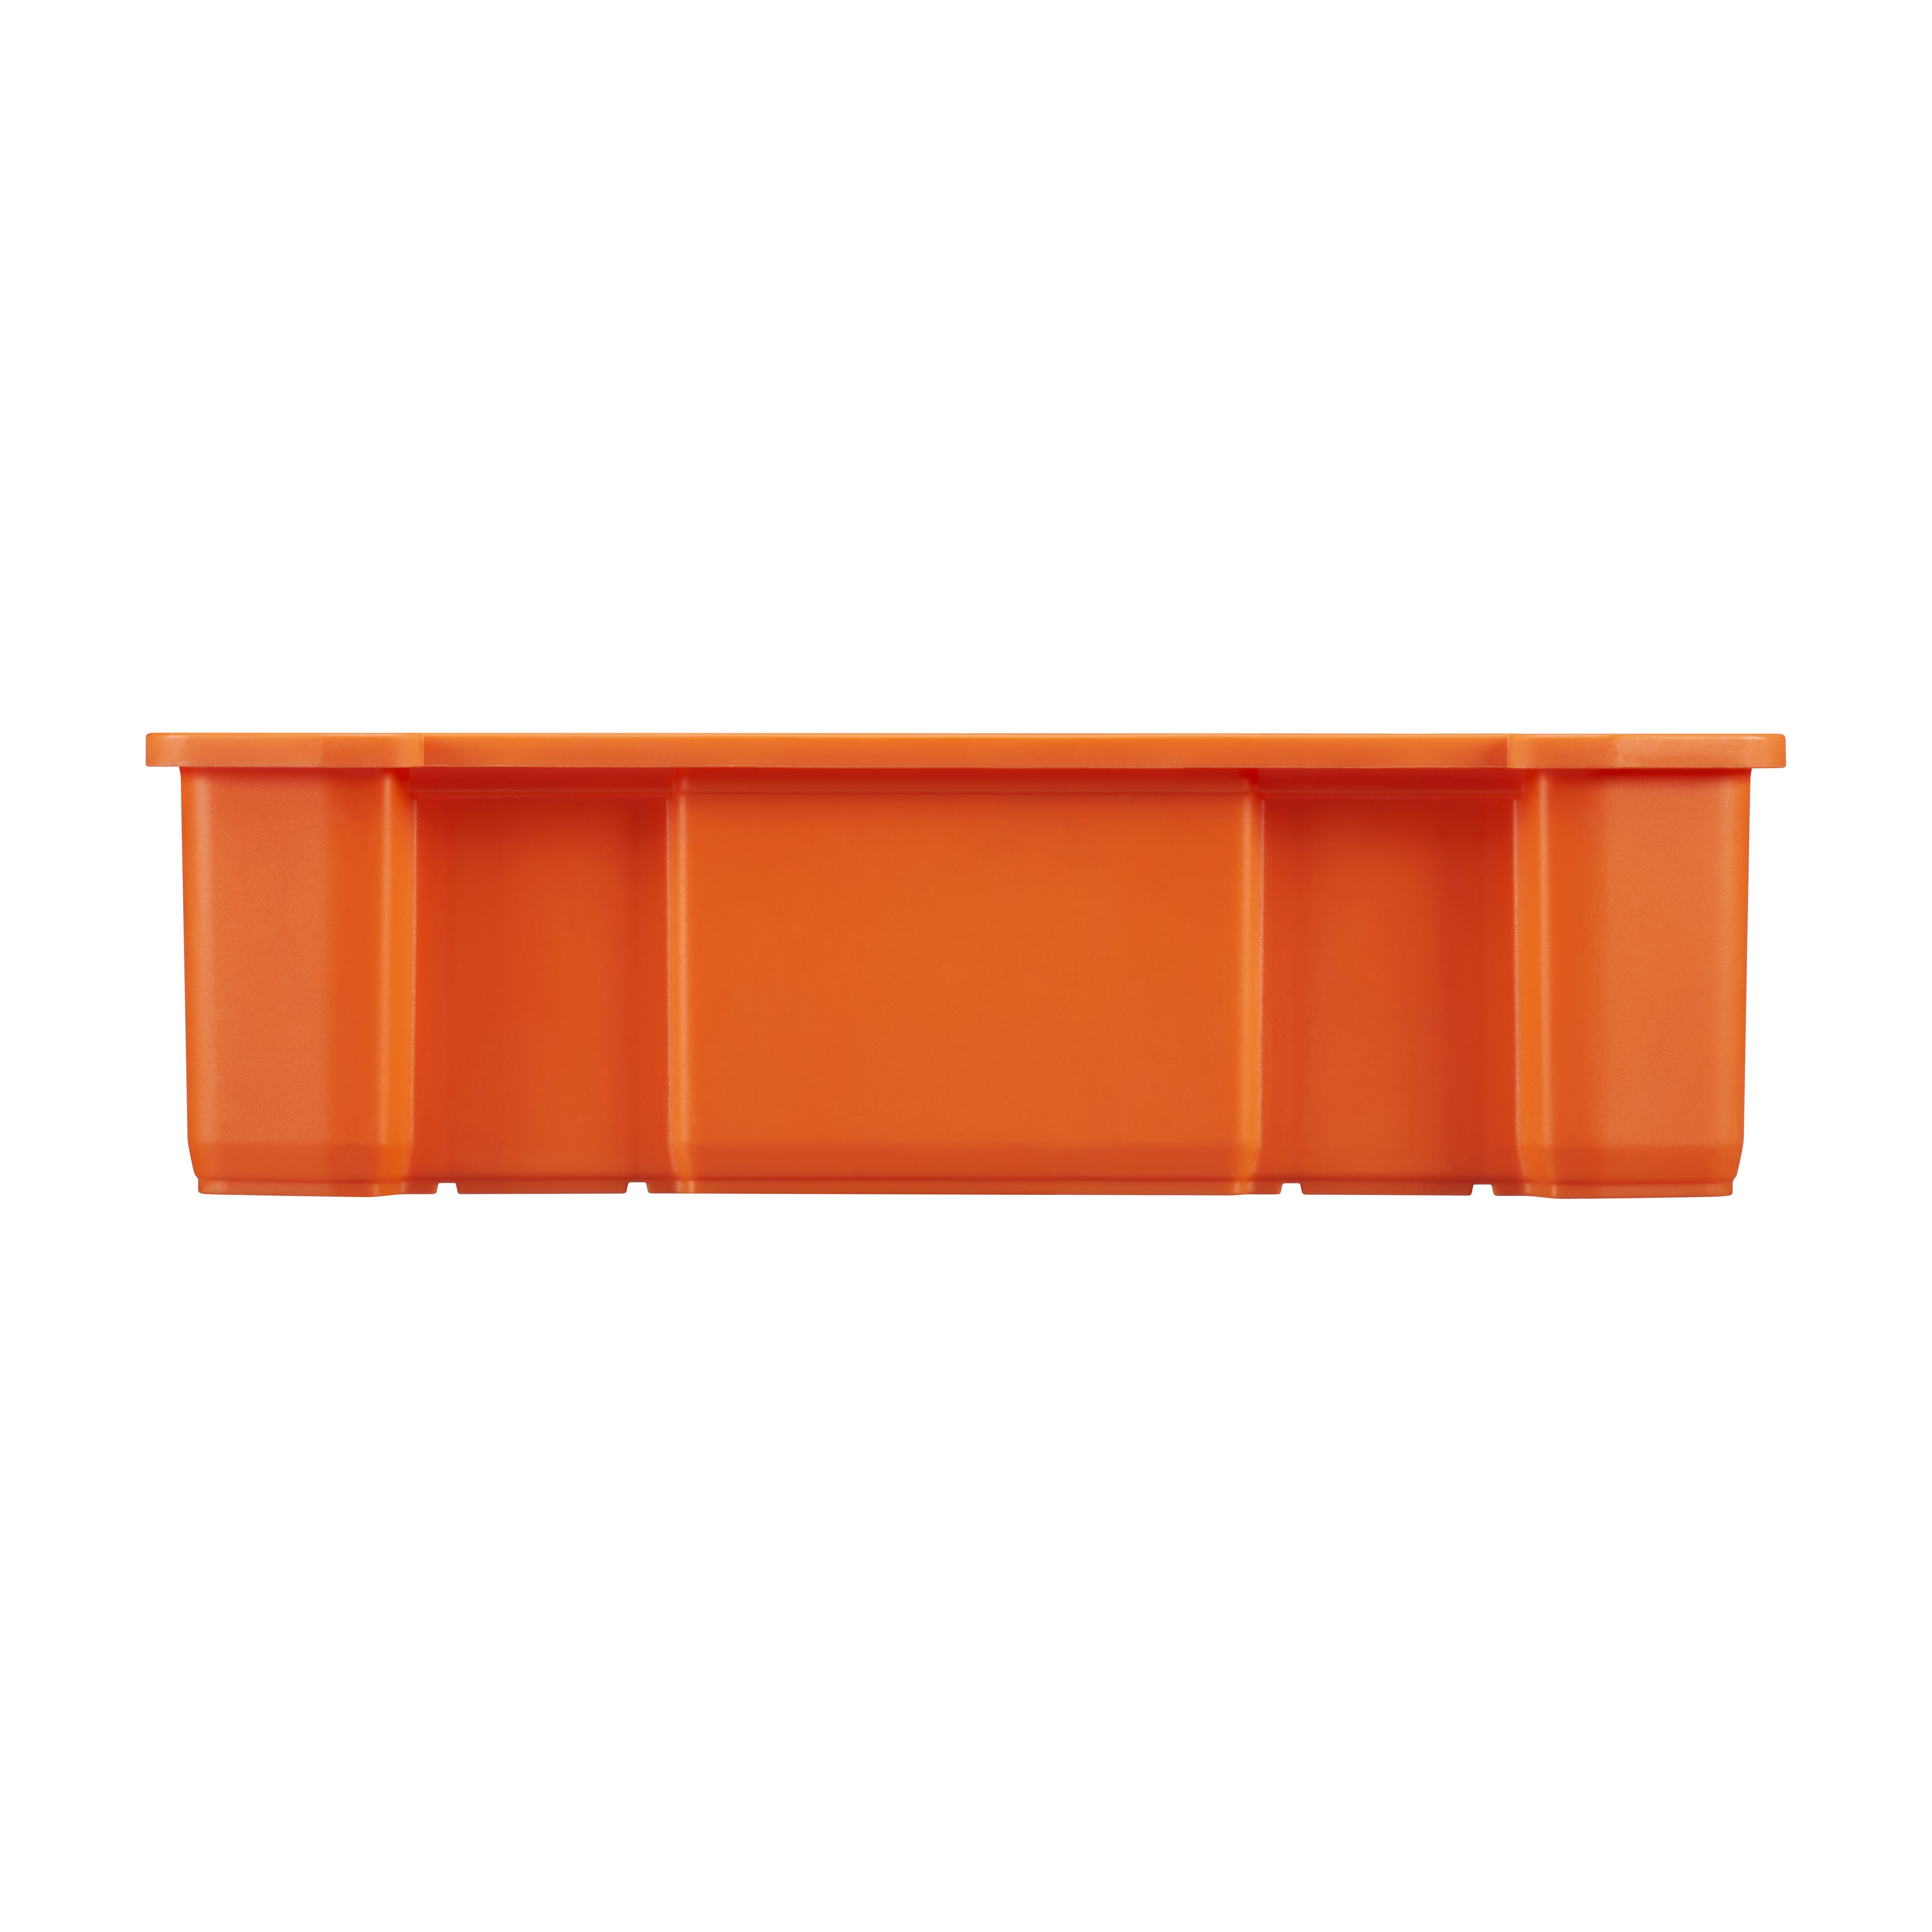 Stanley Polypropylene 2 compartment Tote tray caddy (L)492mm (H)336mm